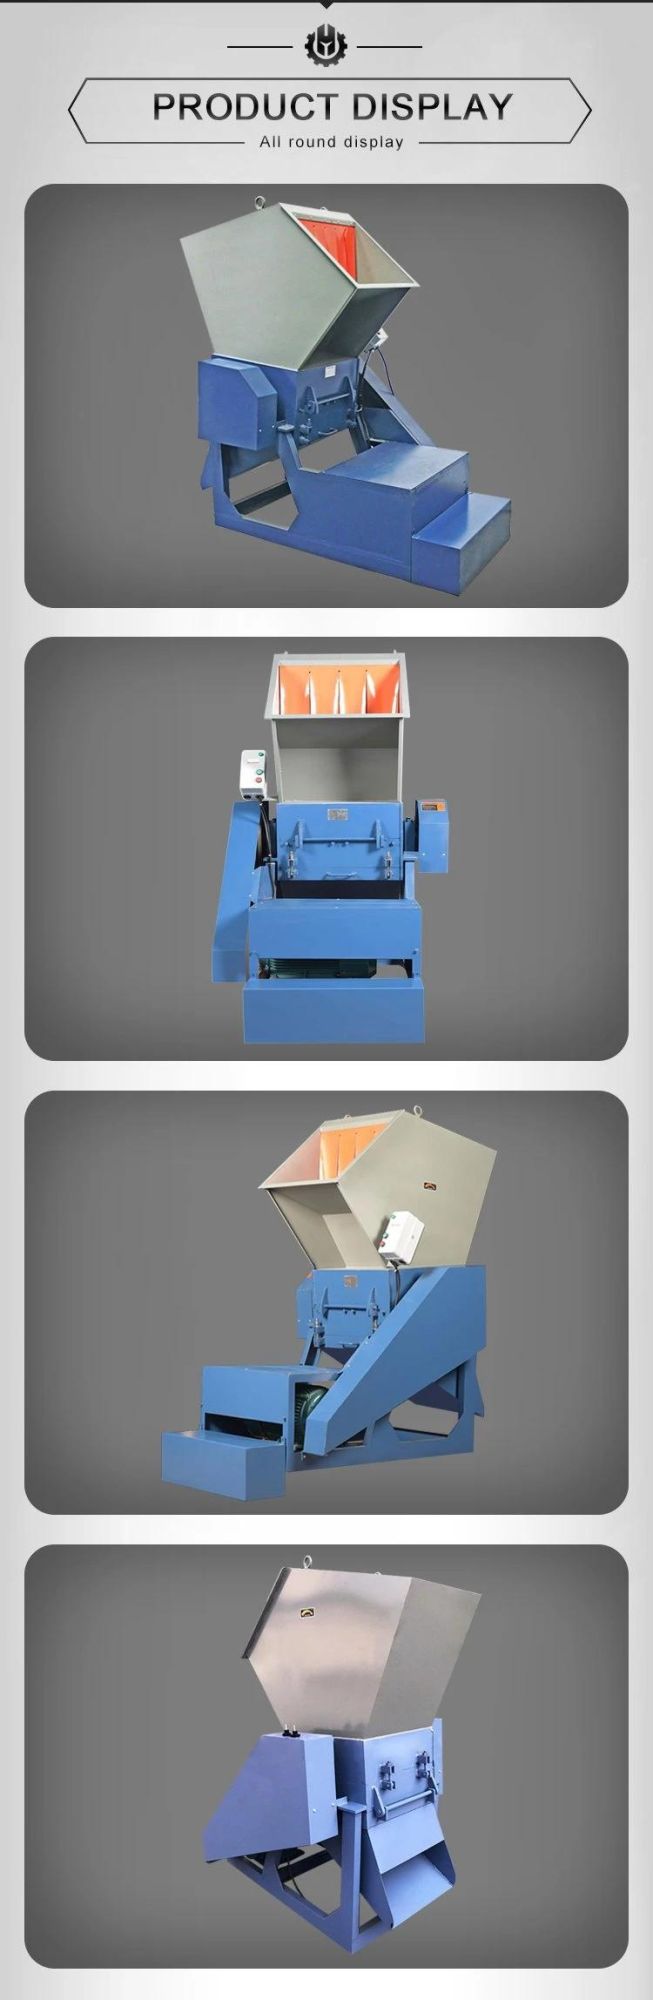 Hollow Crusher Machine High Quality Good Price Factory Products for Waste Plastic Recycling and Crushing